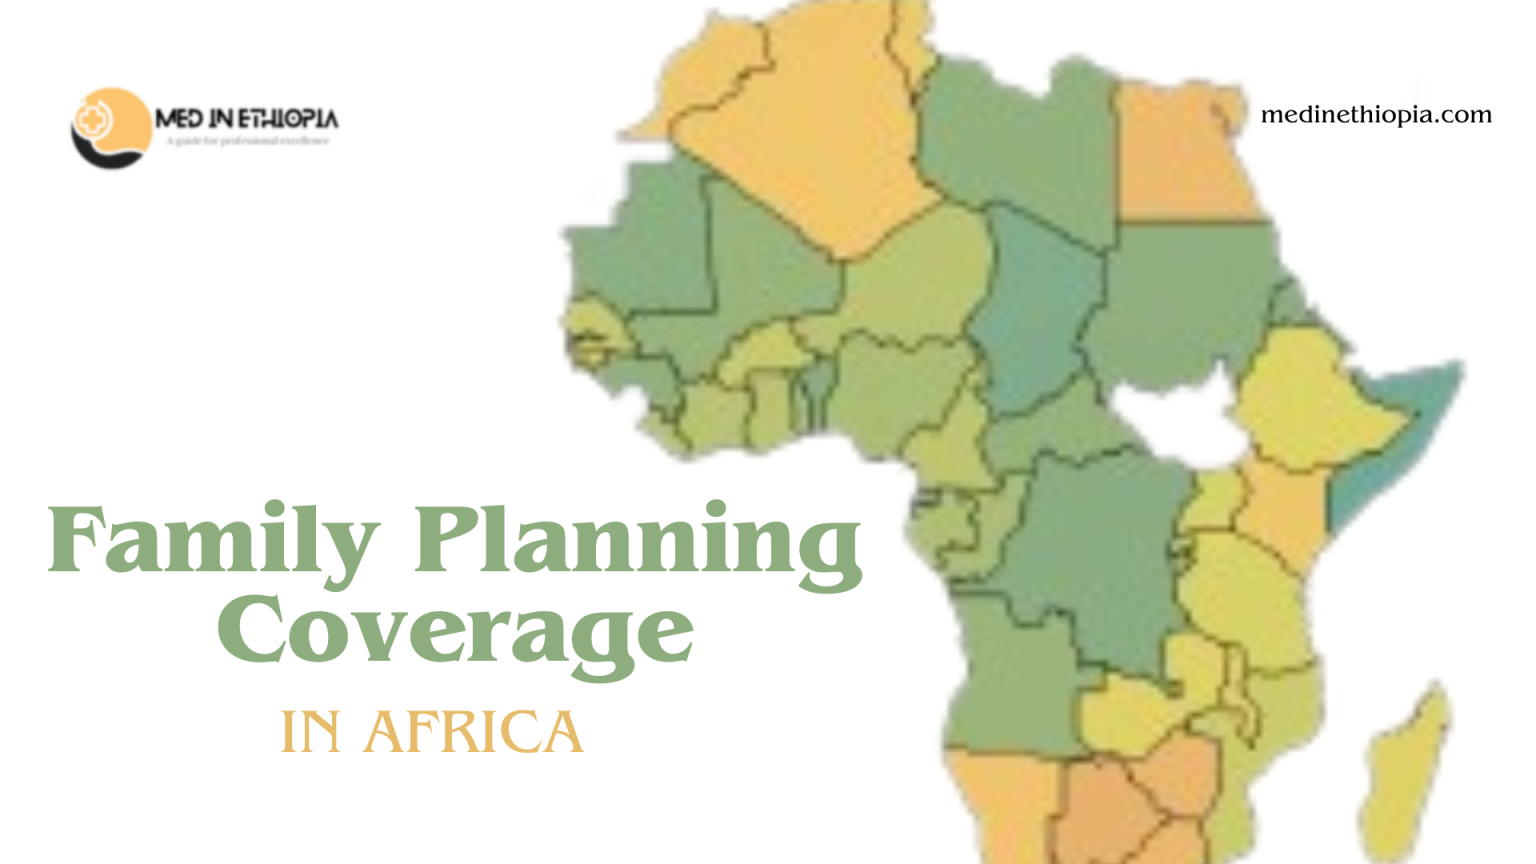 Family Planning Coverage in Africa